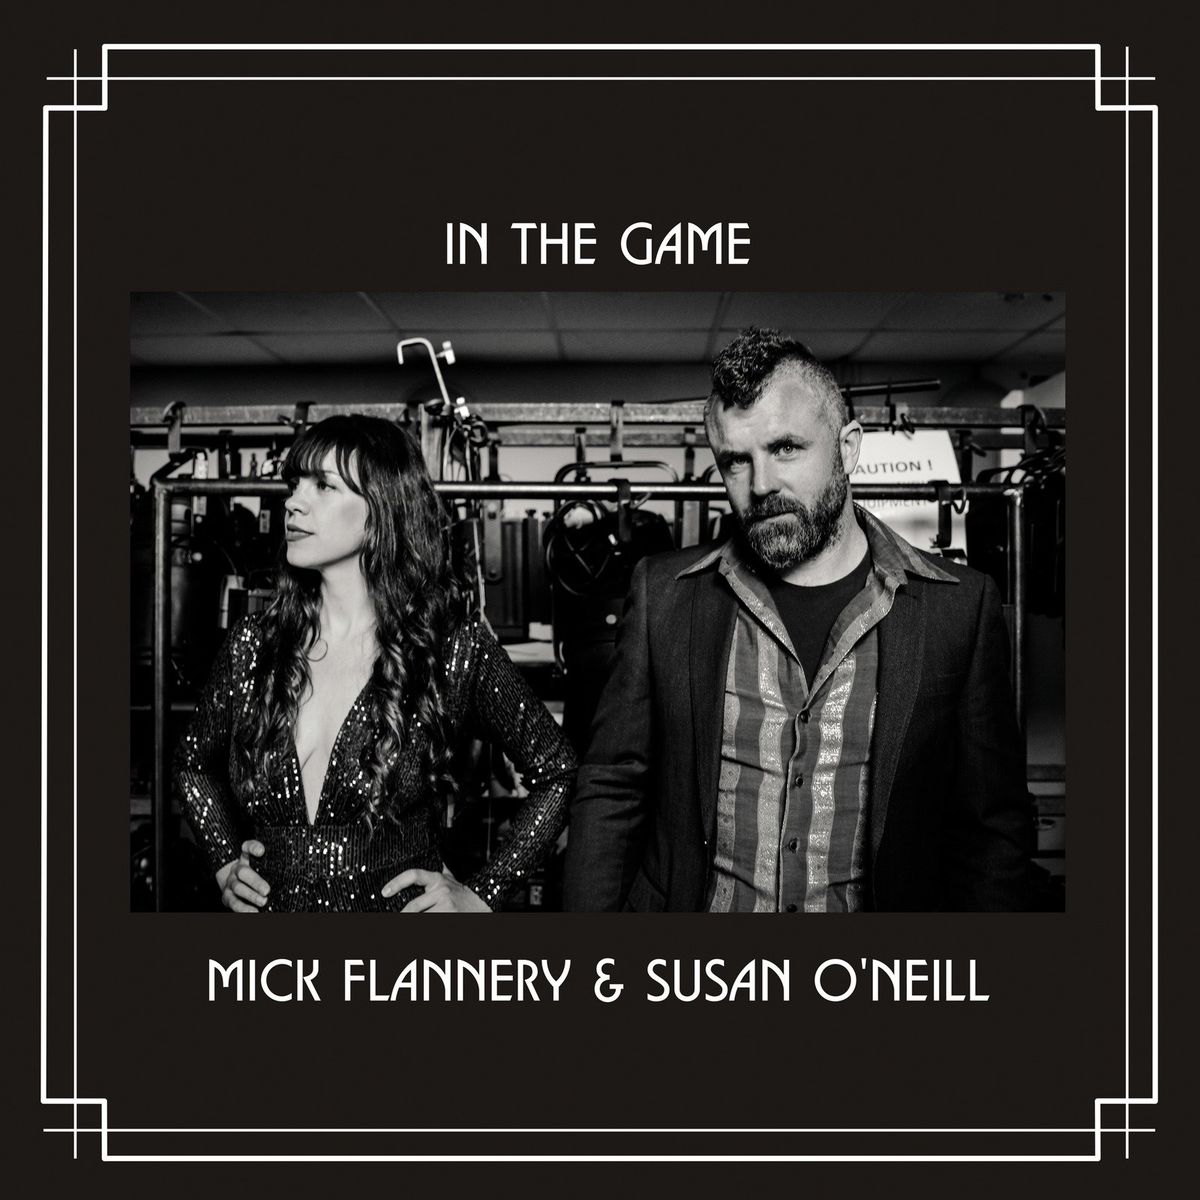 Mick Flannery & Susan O'Neil - 2021 - In The Game